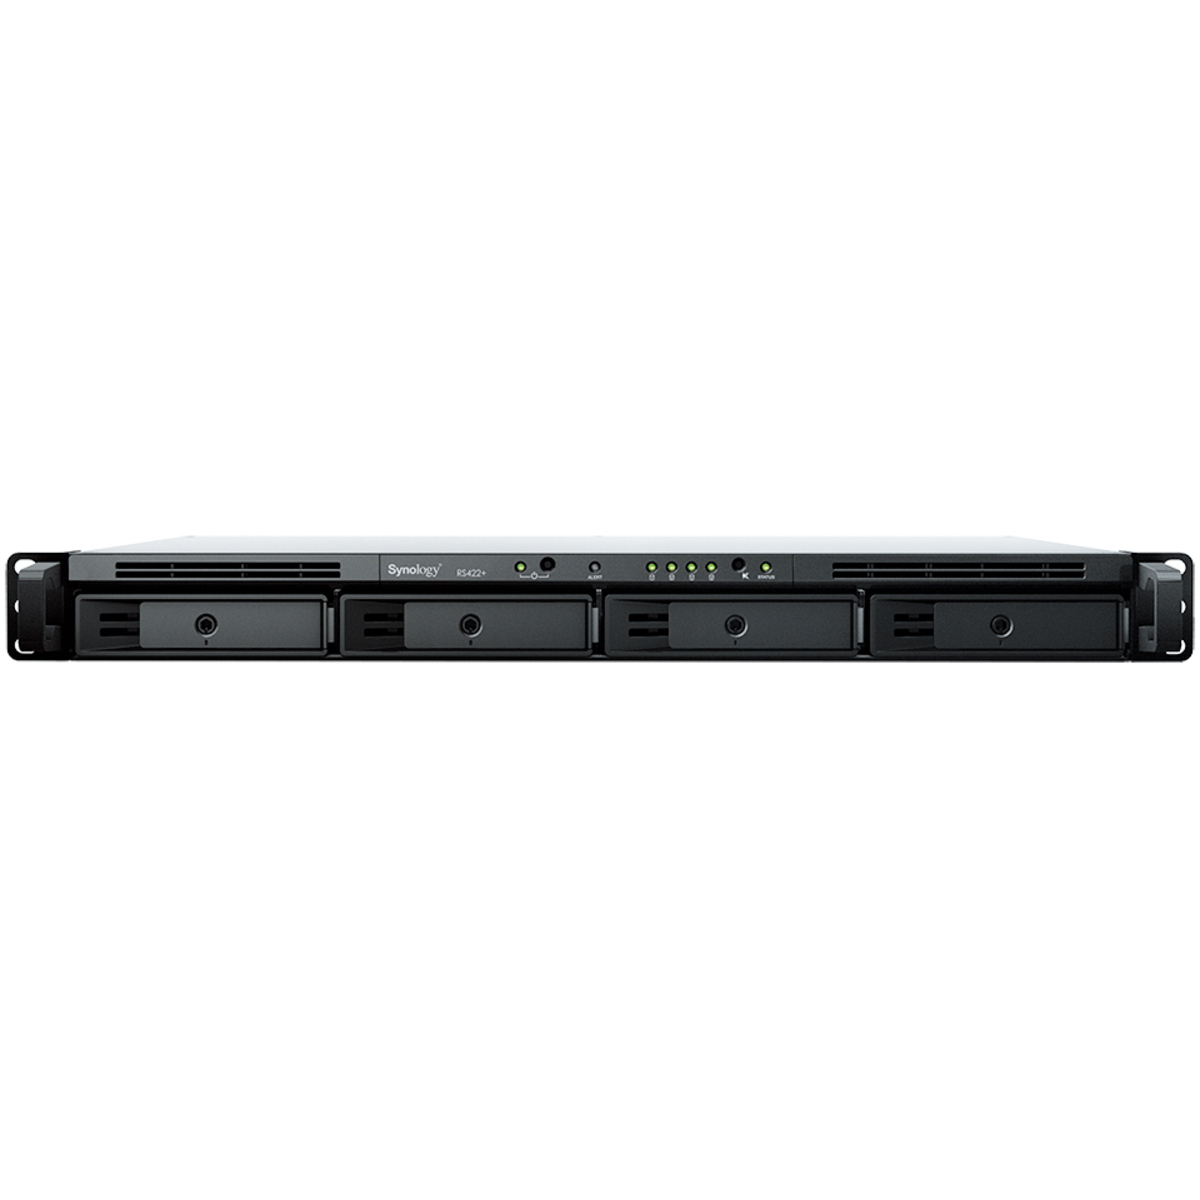 Synology RackStation RS422+ 88tb 4-Bay RackMount Personal / Basic Home / Small Office NAS - Network Attached Storage Device 4x22tb Seagate IronWolf Pro ST22000NT001 3.5 7200rpm SATA 6Gb/s HDD NAS Class Drives Installed - Burn-In Tested RackStation RS422+